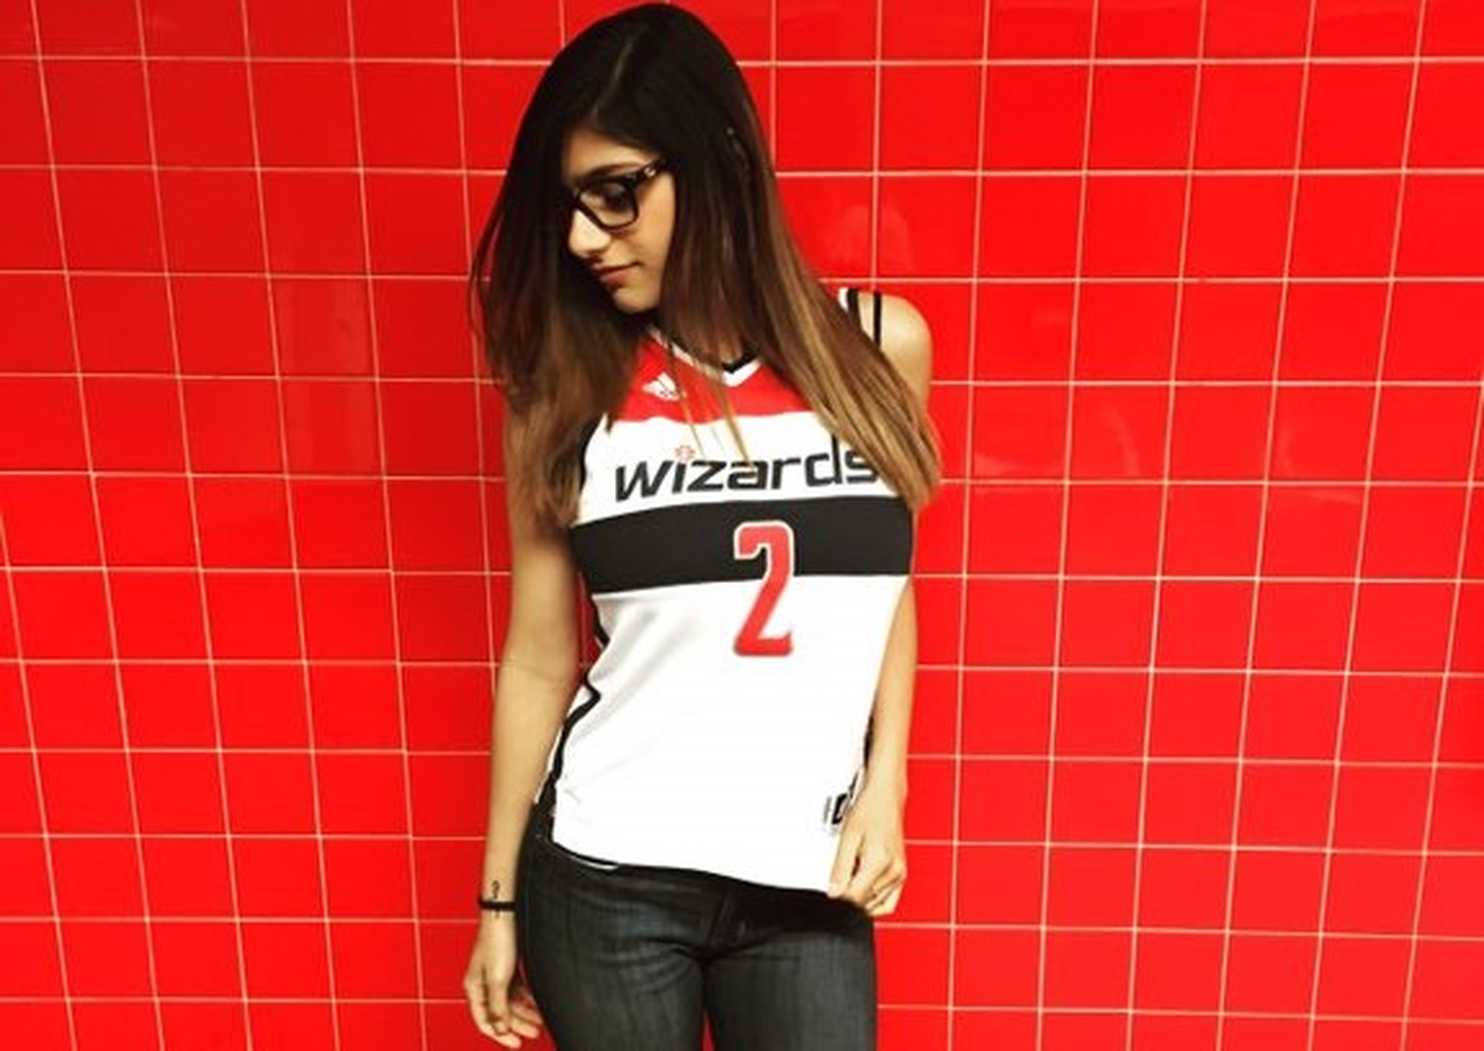 Young Mia Khalifa On Red Tiles Wallpaper